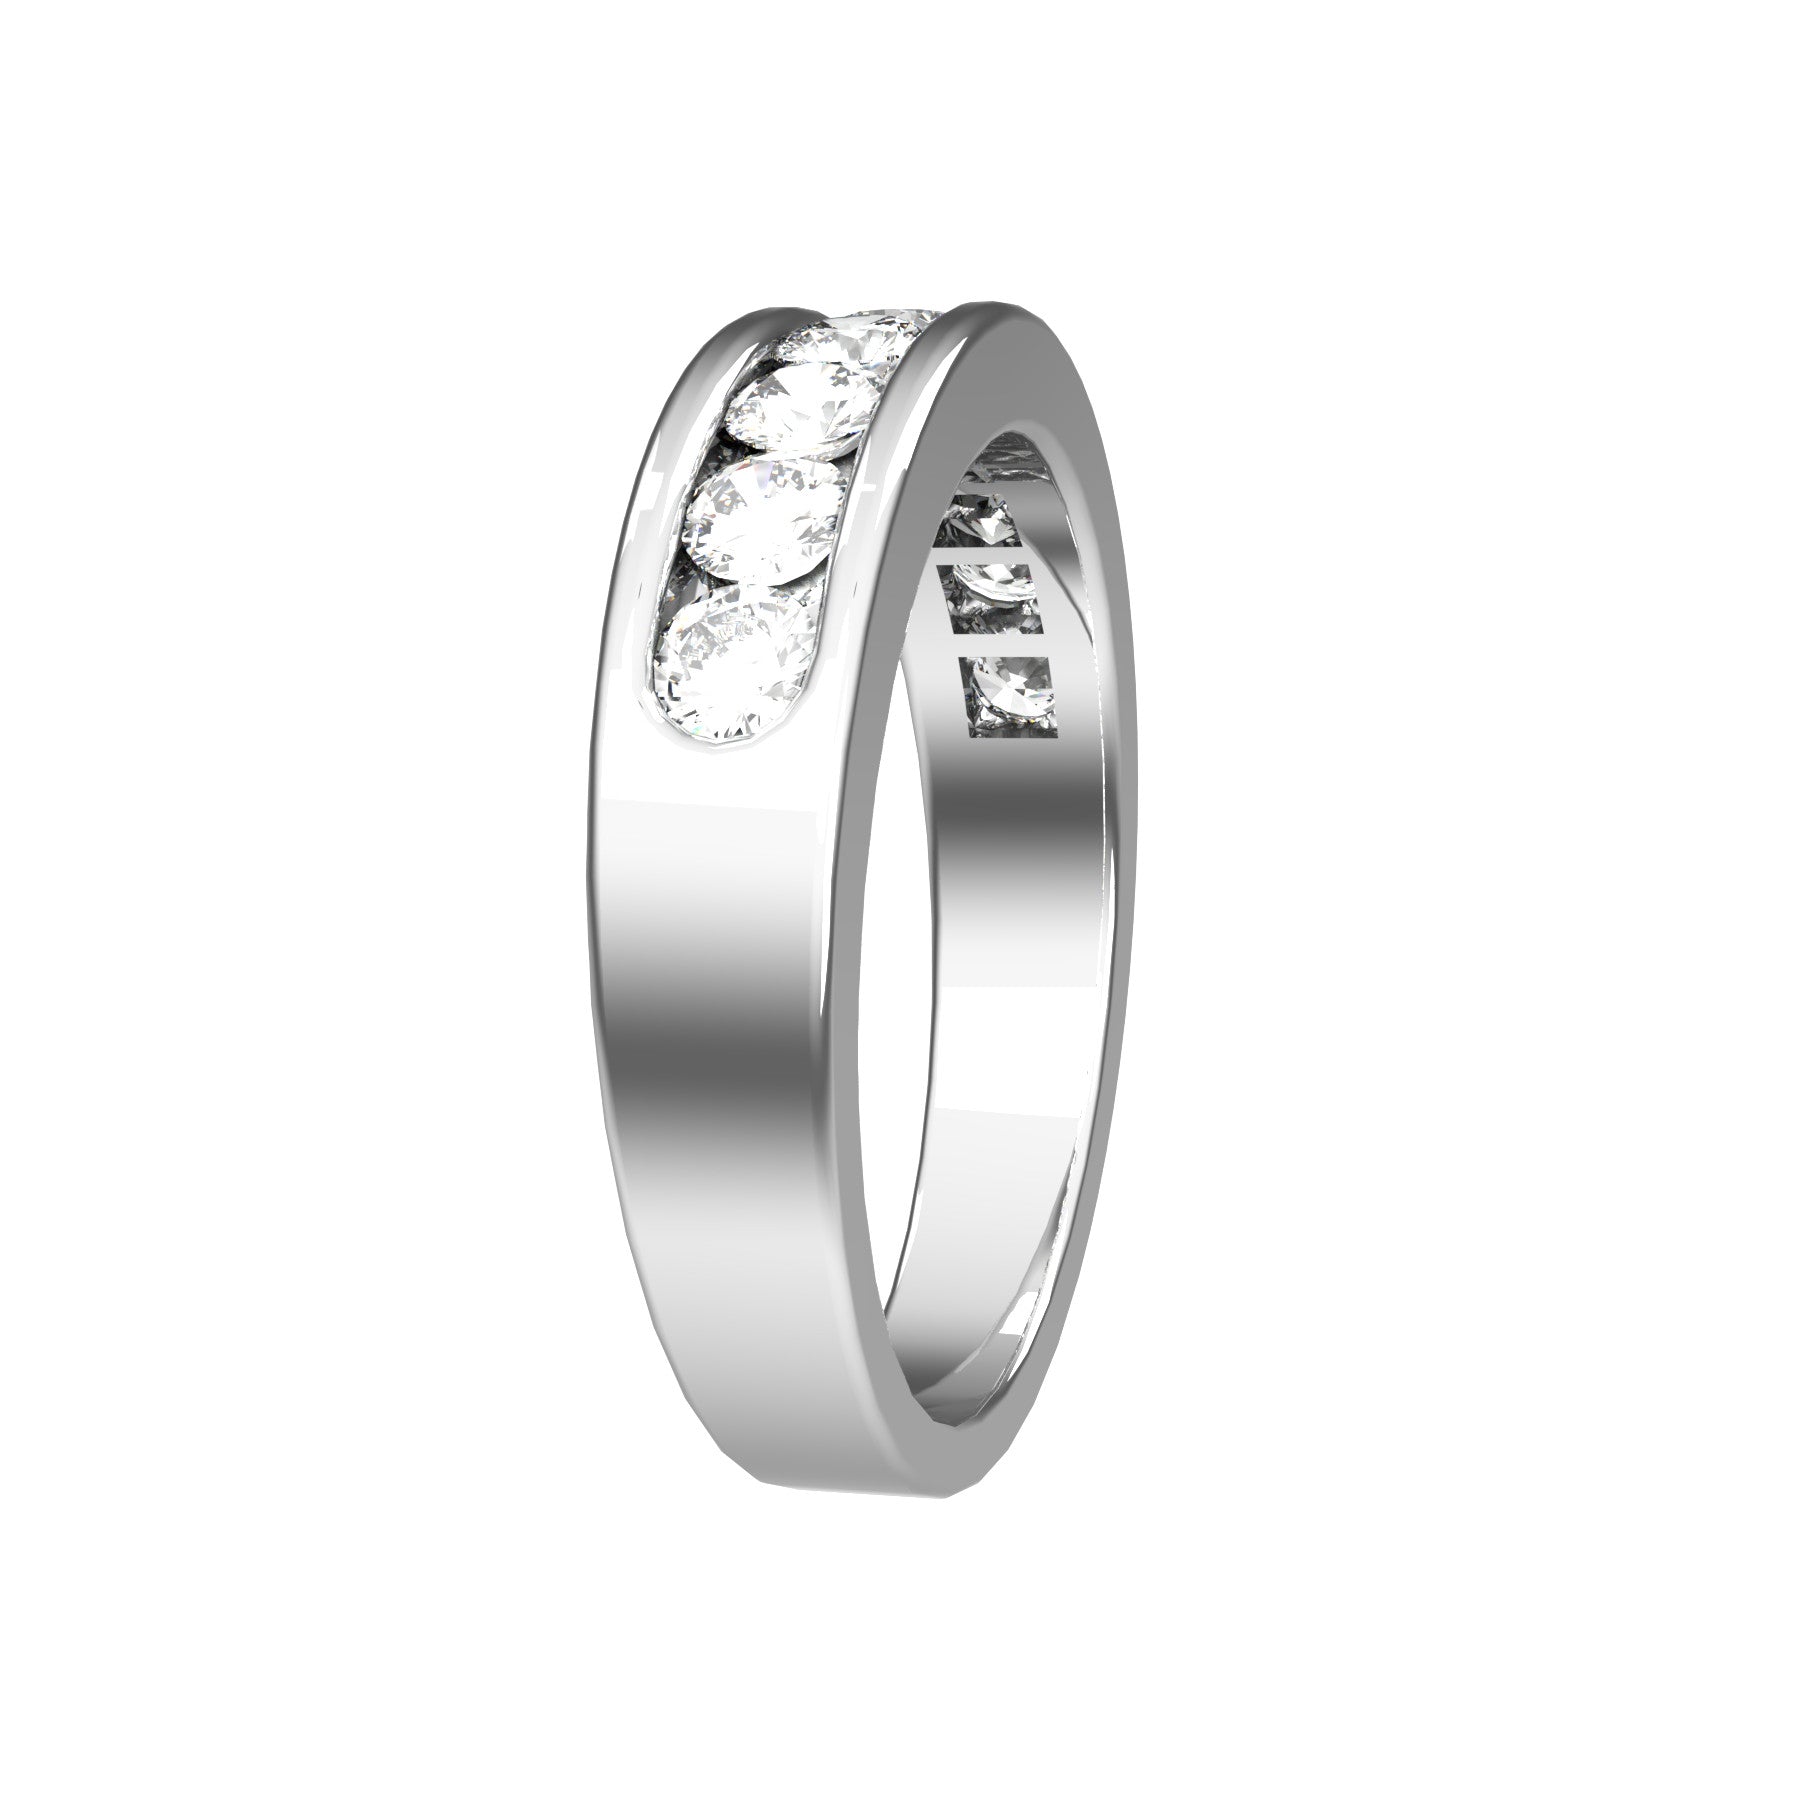 perpetual half wedding ring, 18 K white gold, 0,07 ct round natural diamond, weight about 4,5 g. (0.16 oz), width 4,70 mm